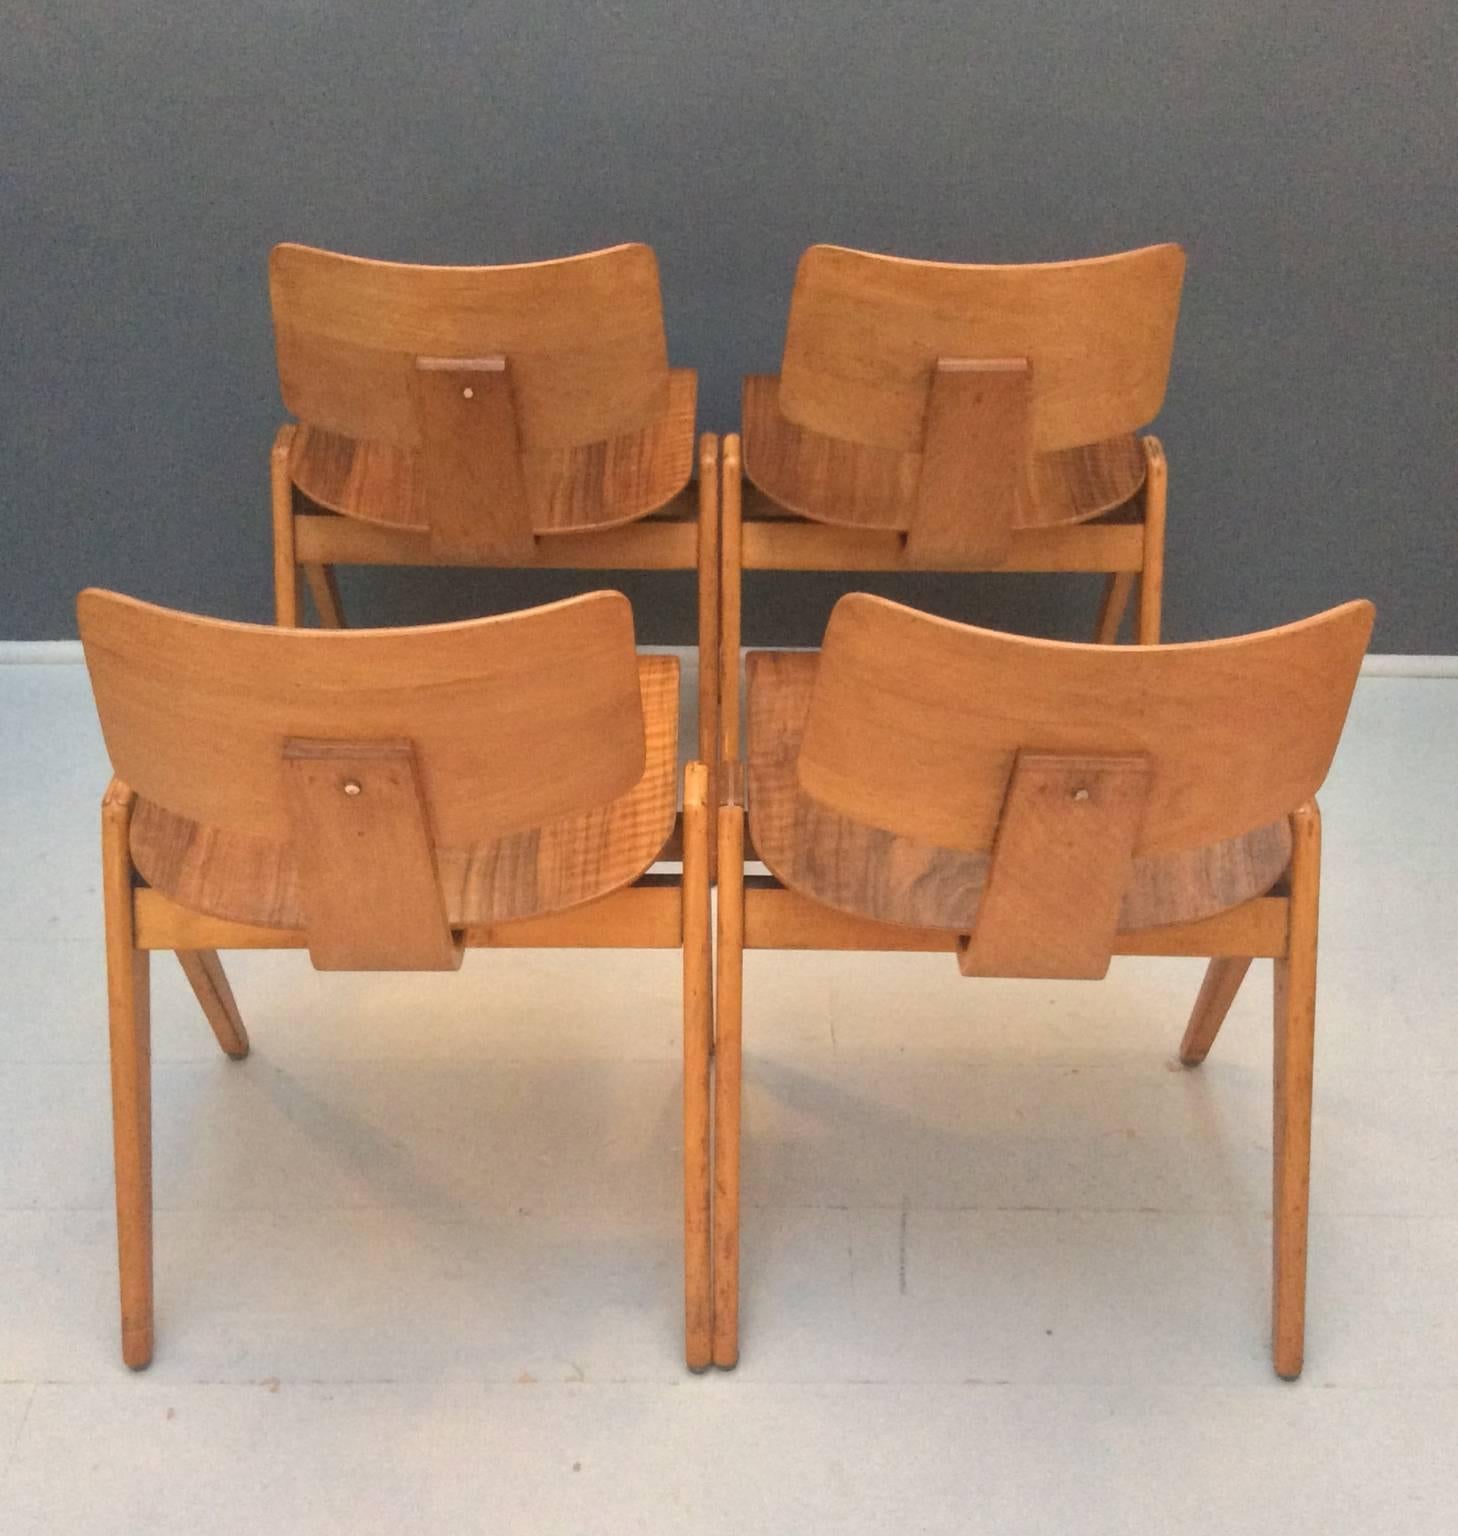 Beech Set of Four Hille Stak Chairs by Robin Day, 1950s